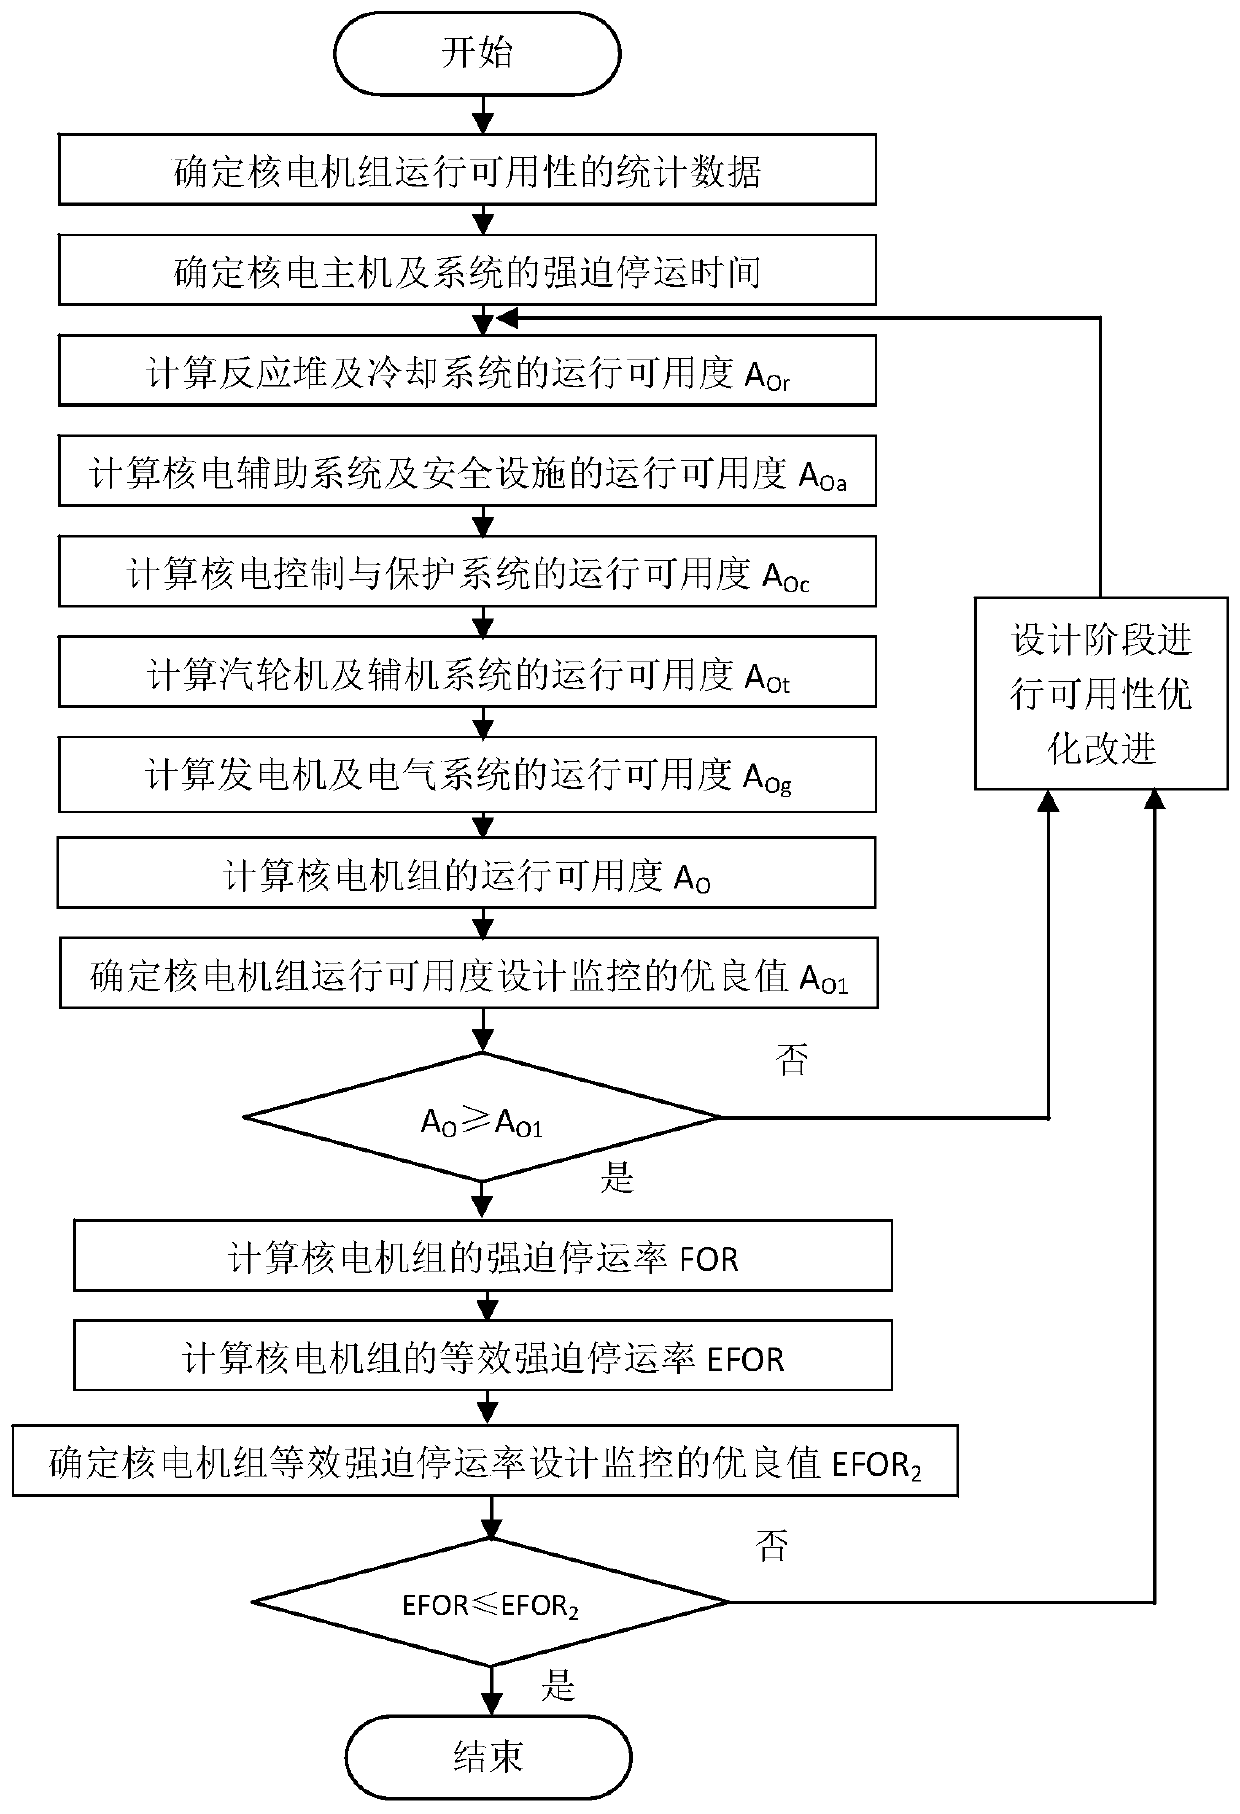 High-availability design monitoring method for nuclear power unit